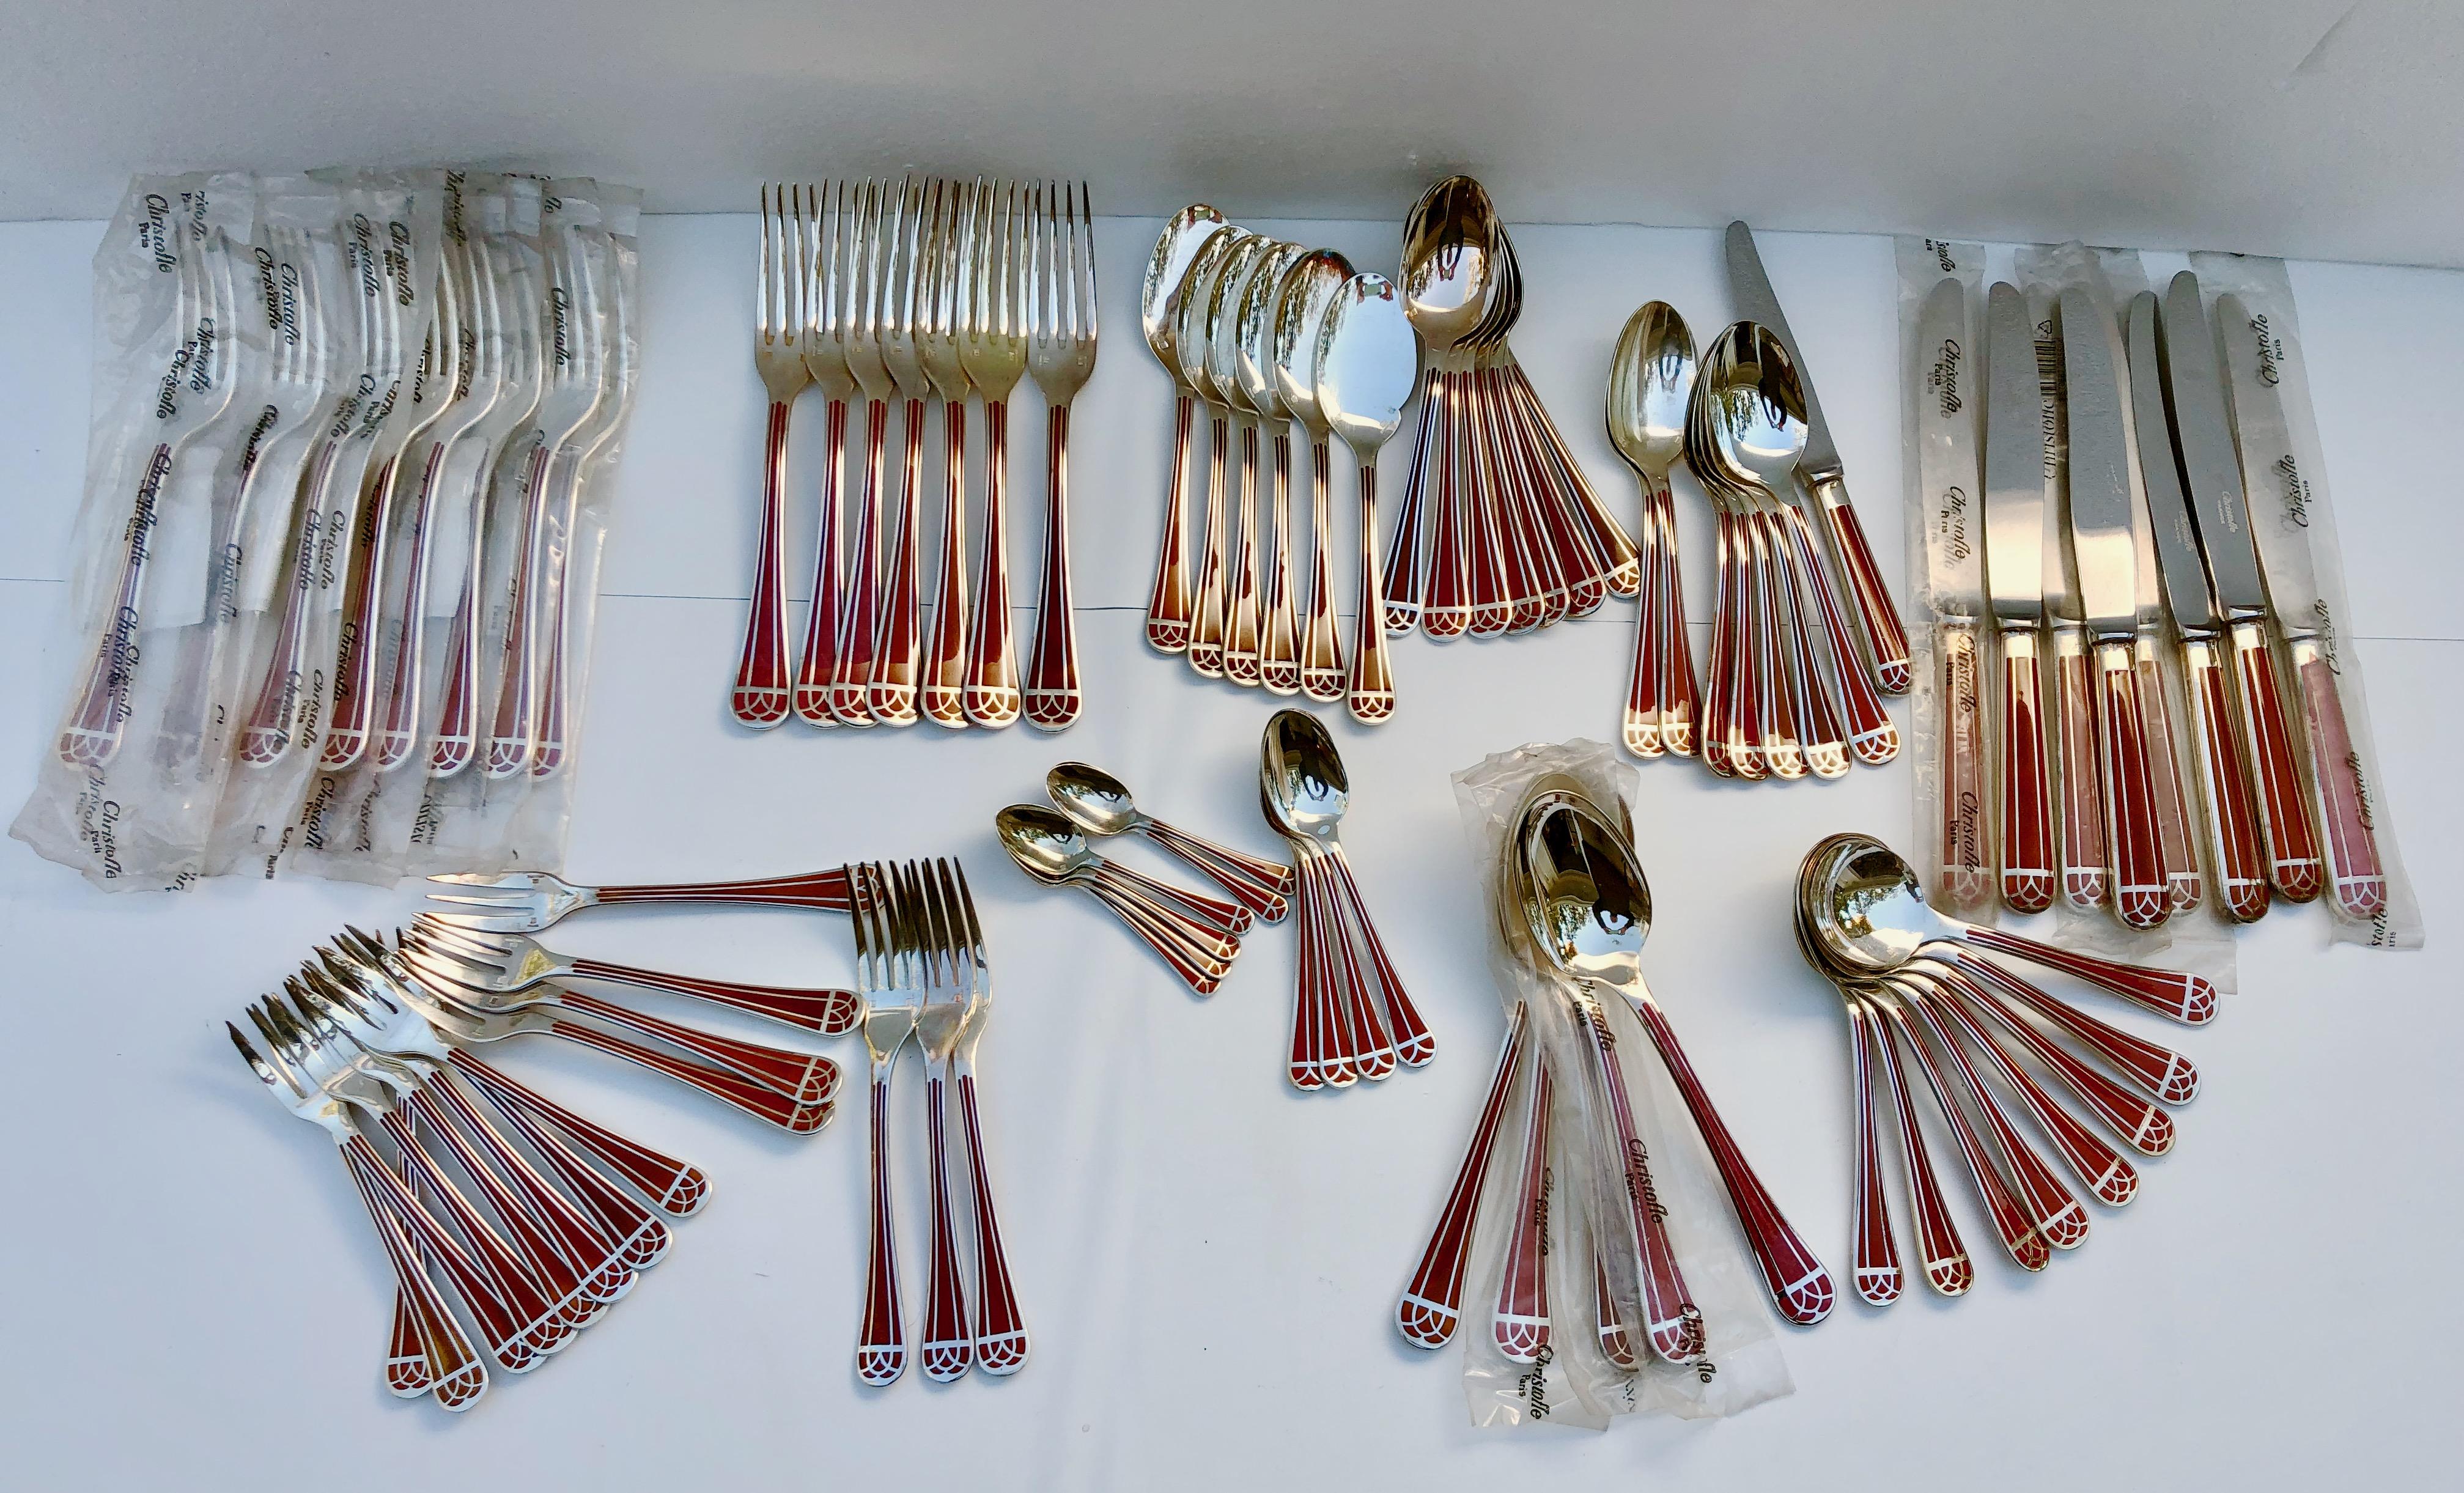 This is a beautiful 82-piece set of the French Christofle 